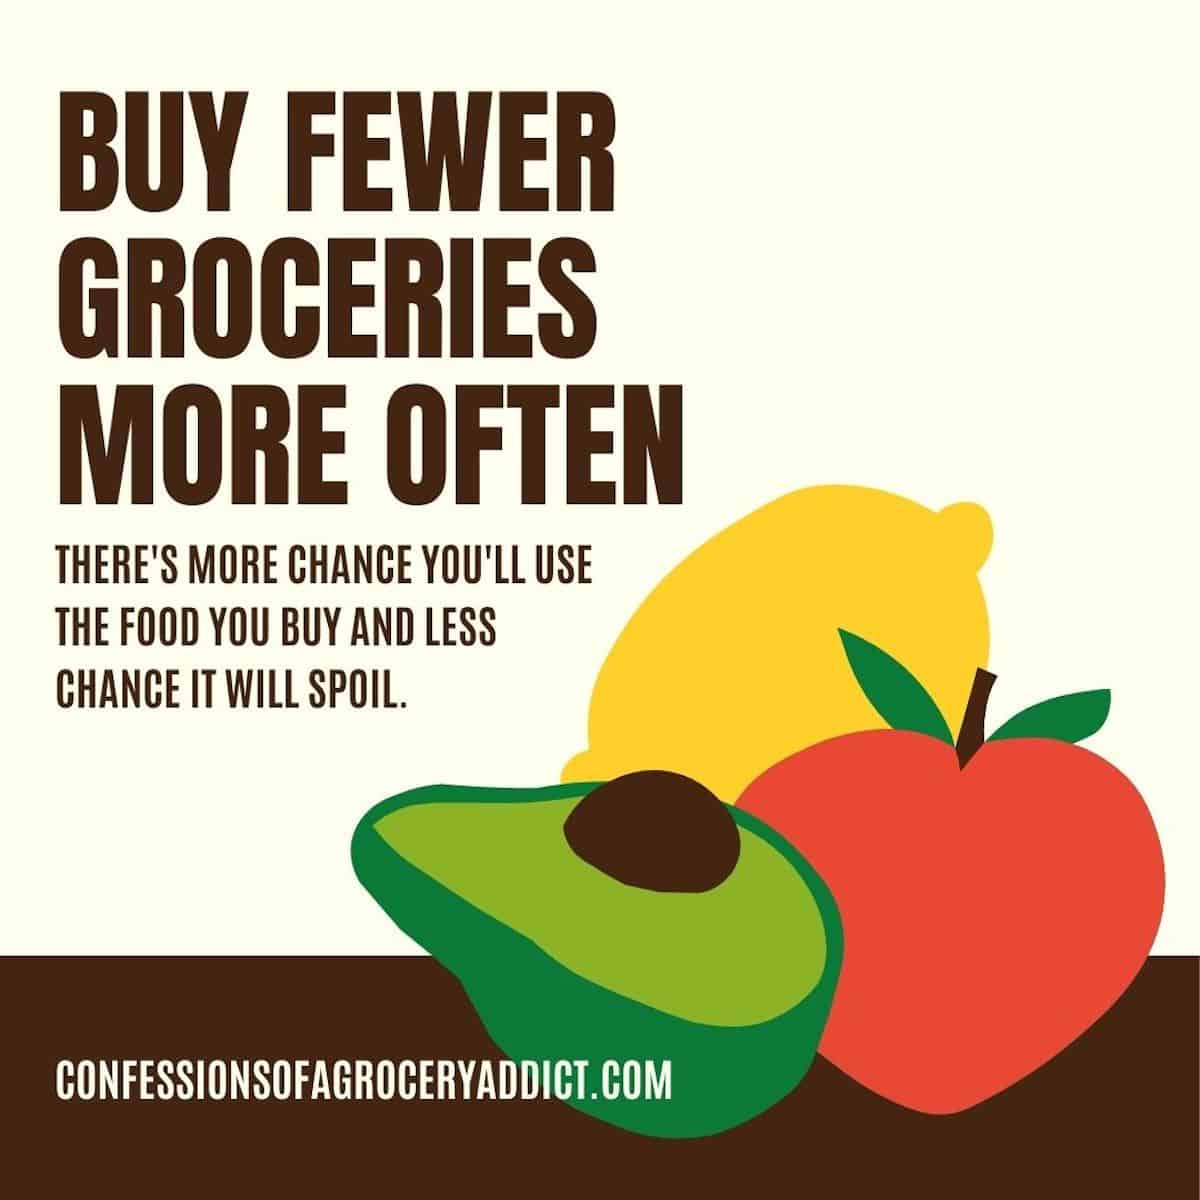 square cartoon image that reads "buy fewer groceries more often; there's more chance you'll use the food you buy and less chance it will spoil" with a drawn apple, lemon, and halved avocado.